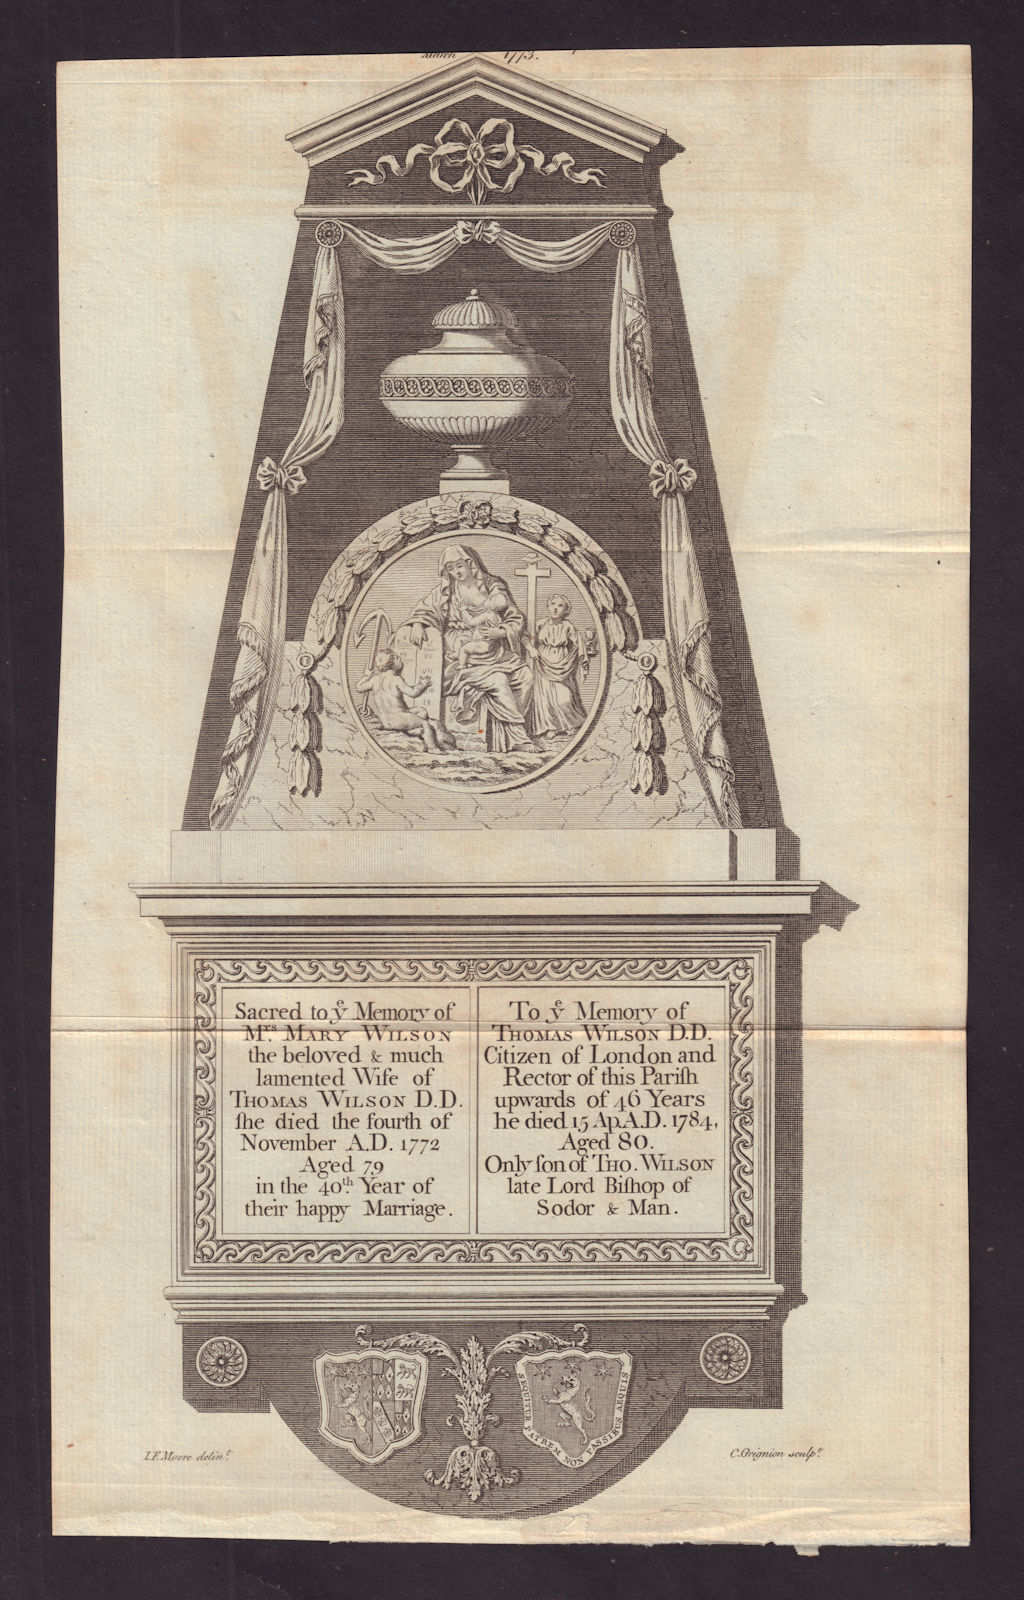 Monument in the Church of St. Stephen, Walbrook, London for Thomas Wilson 1788